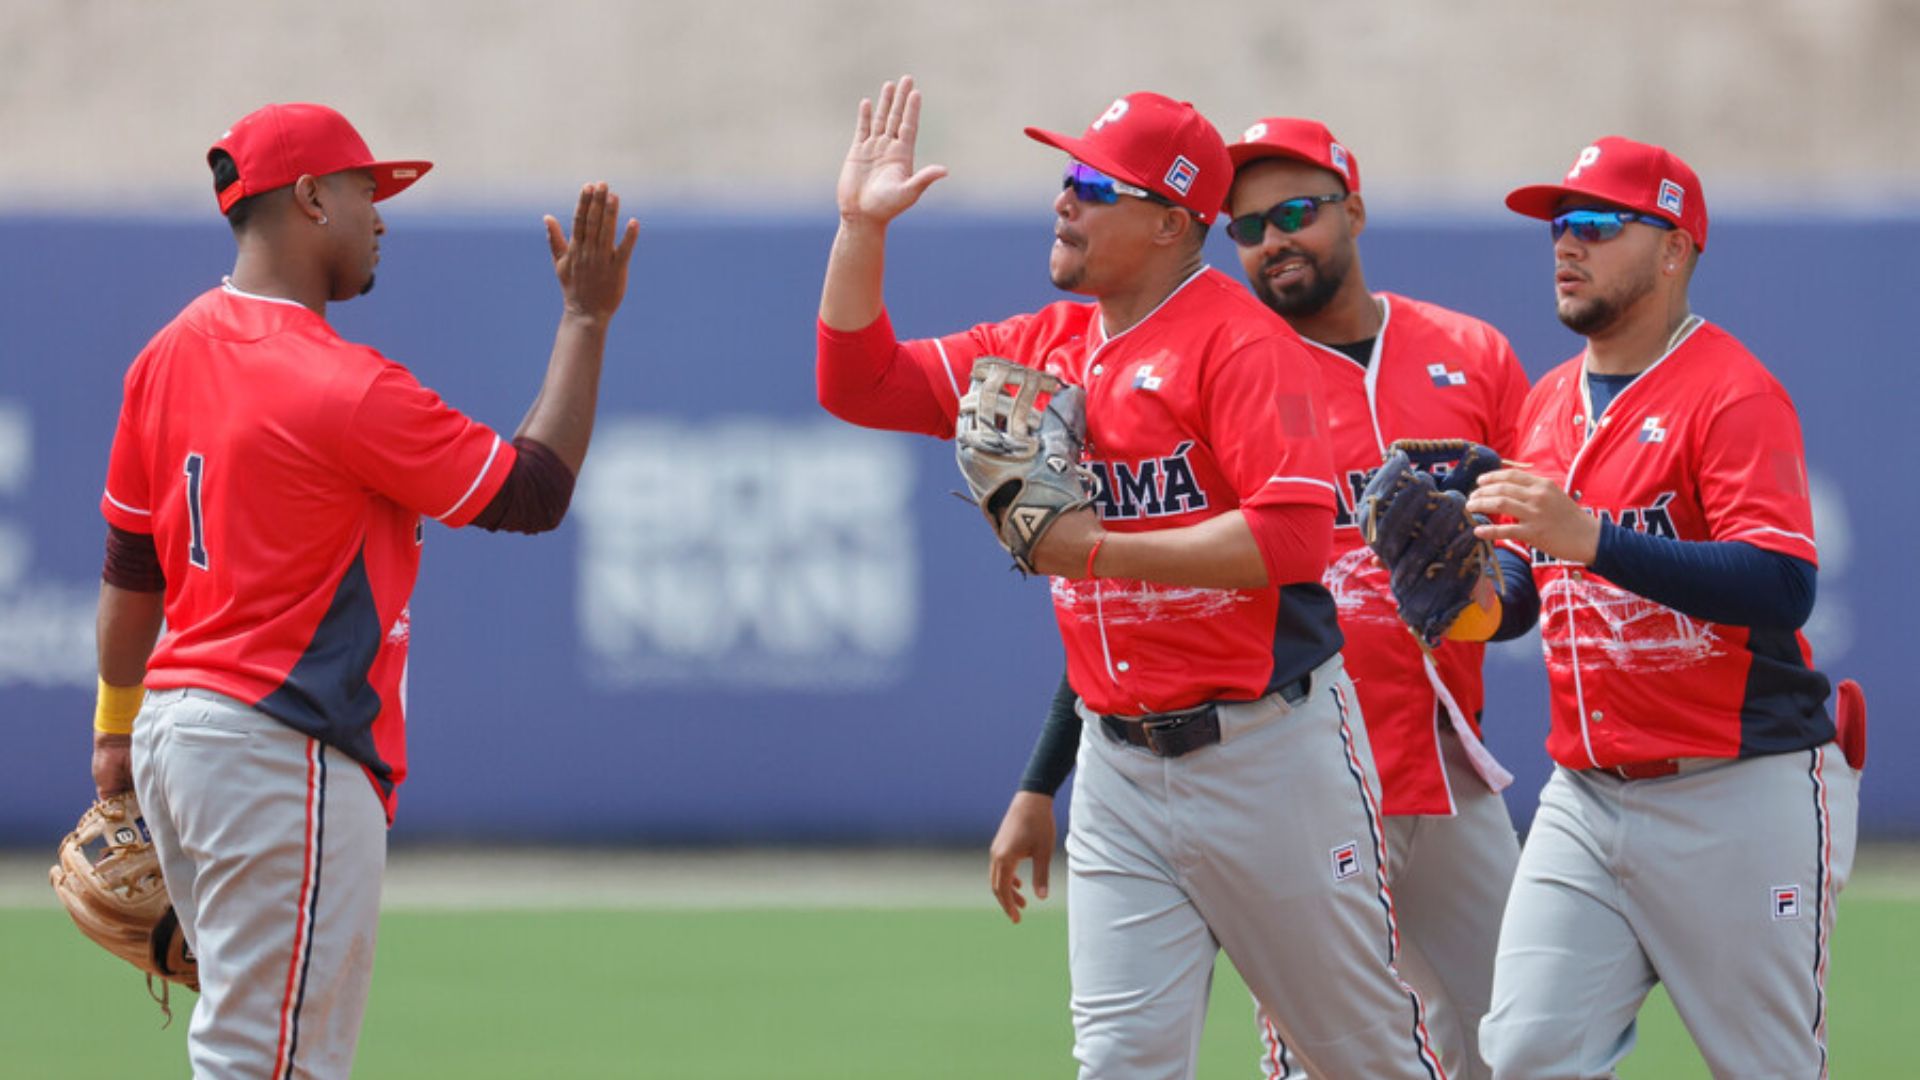 Panama defeated Mexico in baseball and topped its group